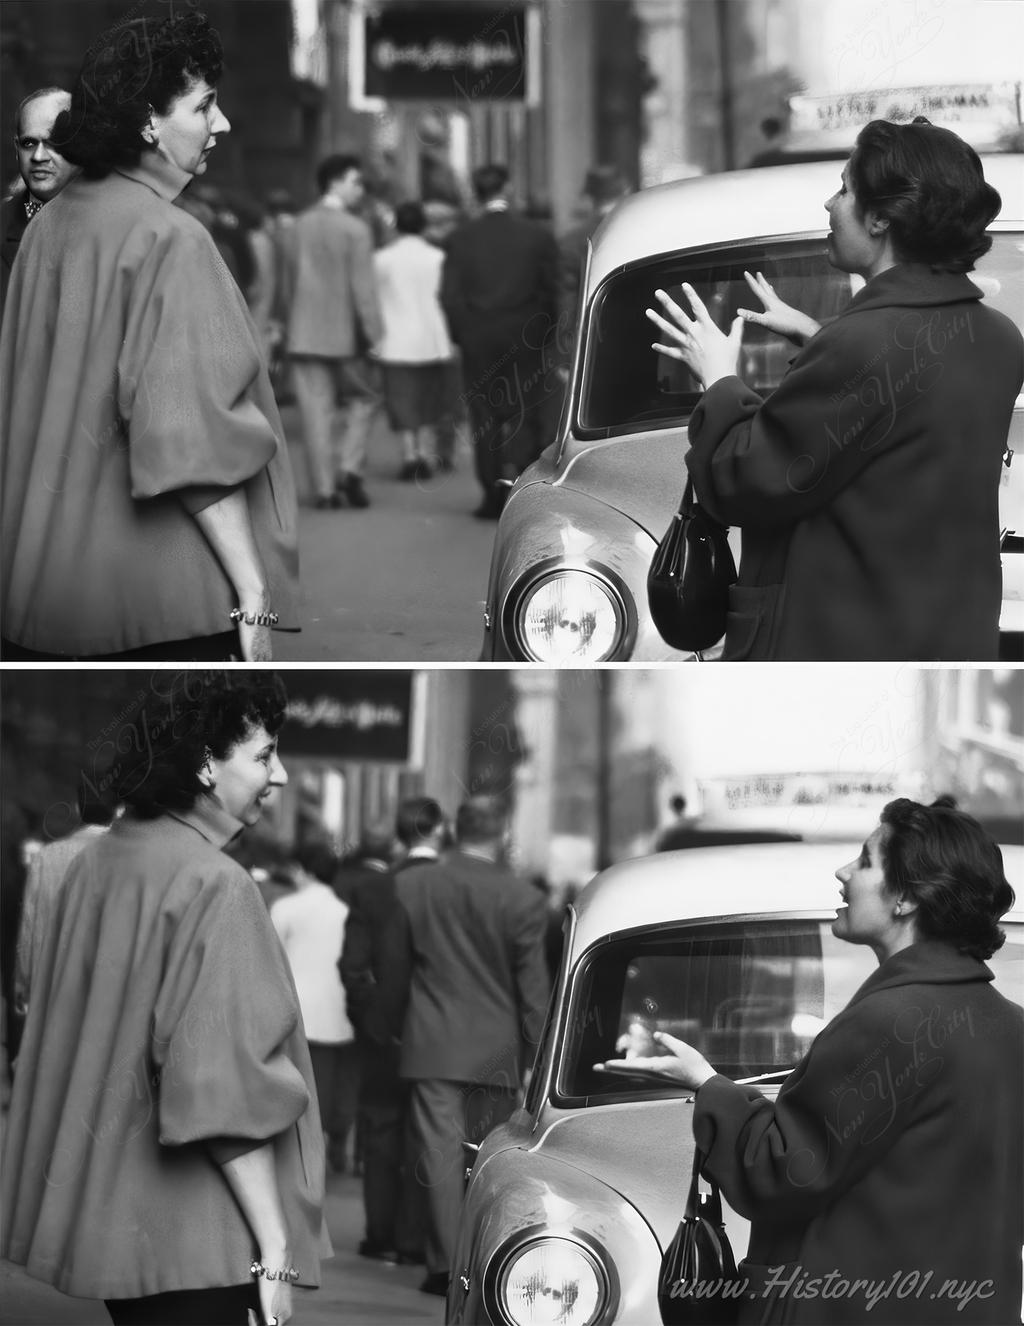 Photograph shows two separate shots of women having a conversation on the curb in front of a New York City taxi.